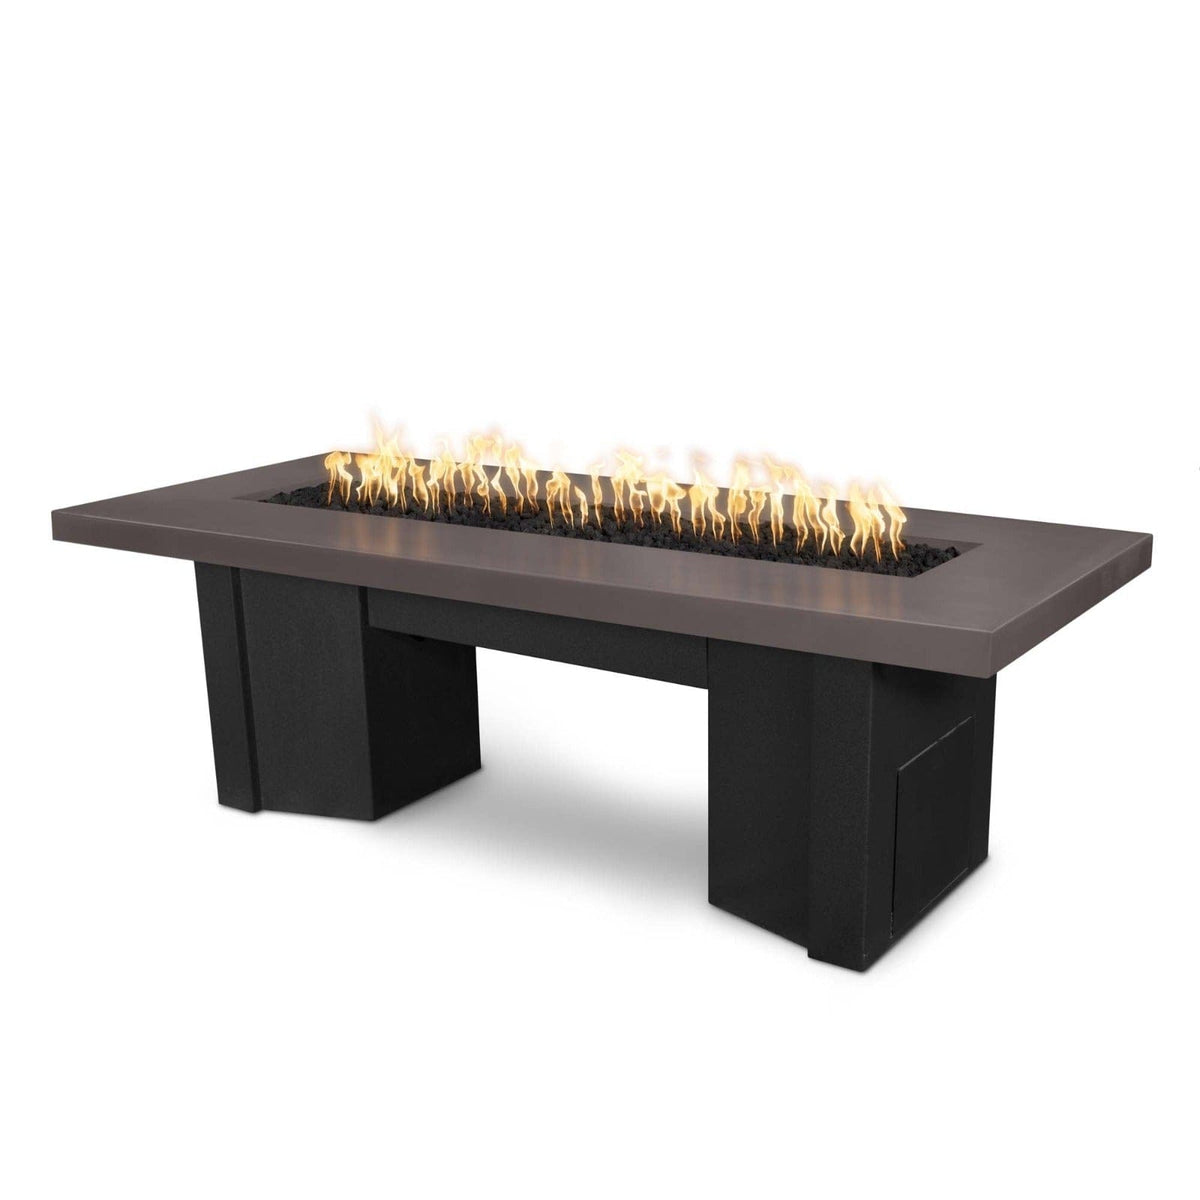 The Outdoor Plus Fire Features Chestnut (-CST) / Black Powder Coated Steel (-BLK) The Outdoor Plus 78&quot; Alameda Fire Table Smooth Concrete in Liquid Propane - 110V Plug &amp; Play Electronic Ignition / OPT-ALMGFRC78EKIT-LP